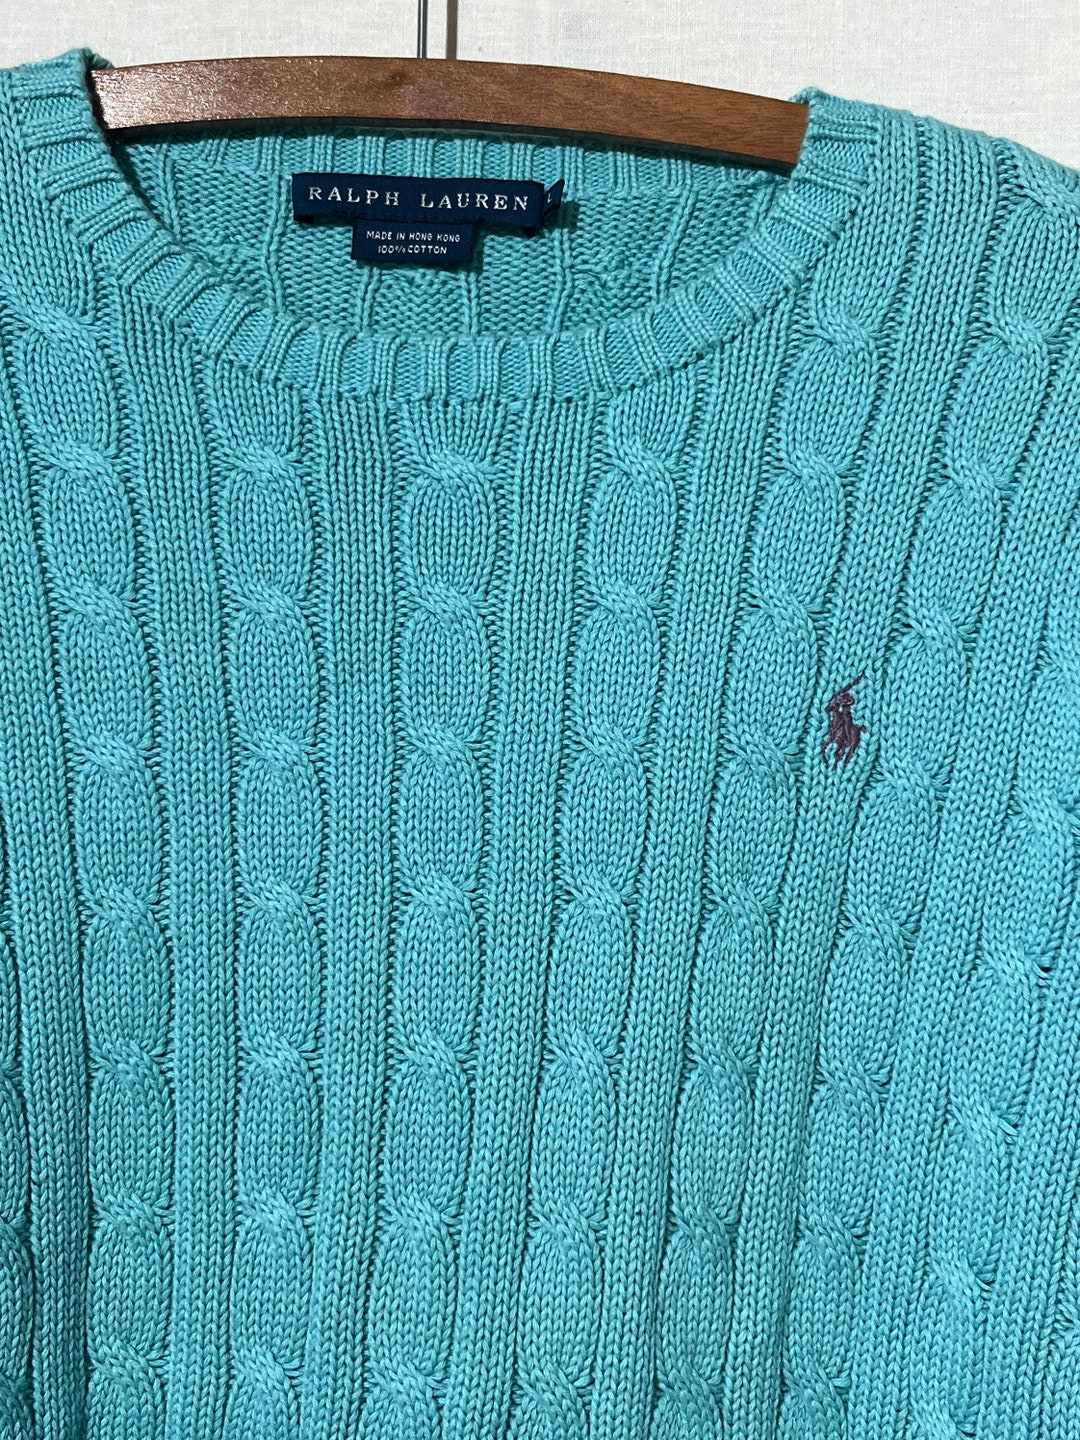 Ralph Lauren Polo Cableknit Turquoise Sweater - Etsy